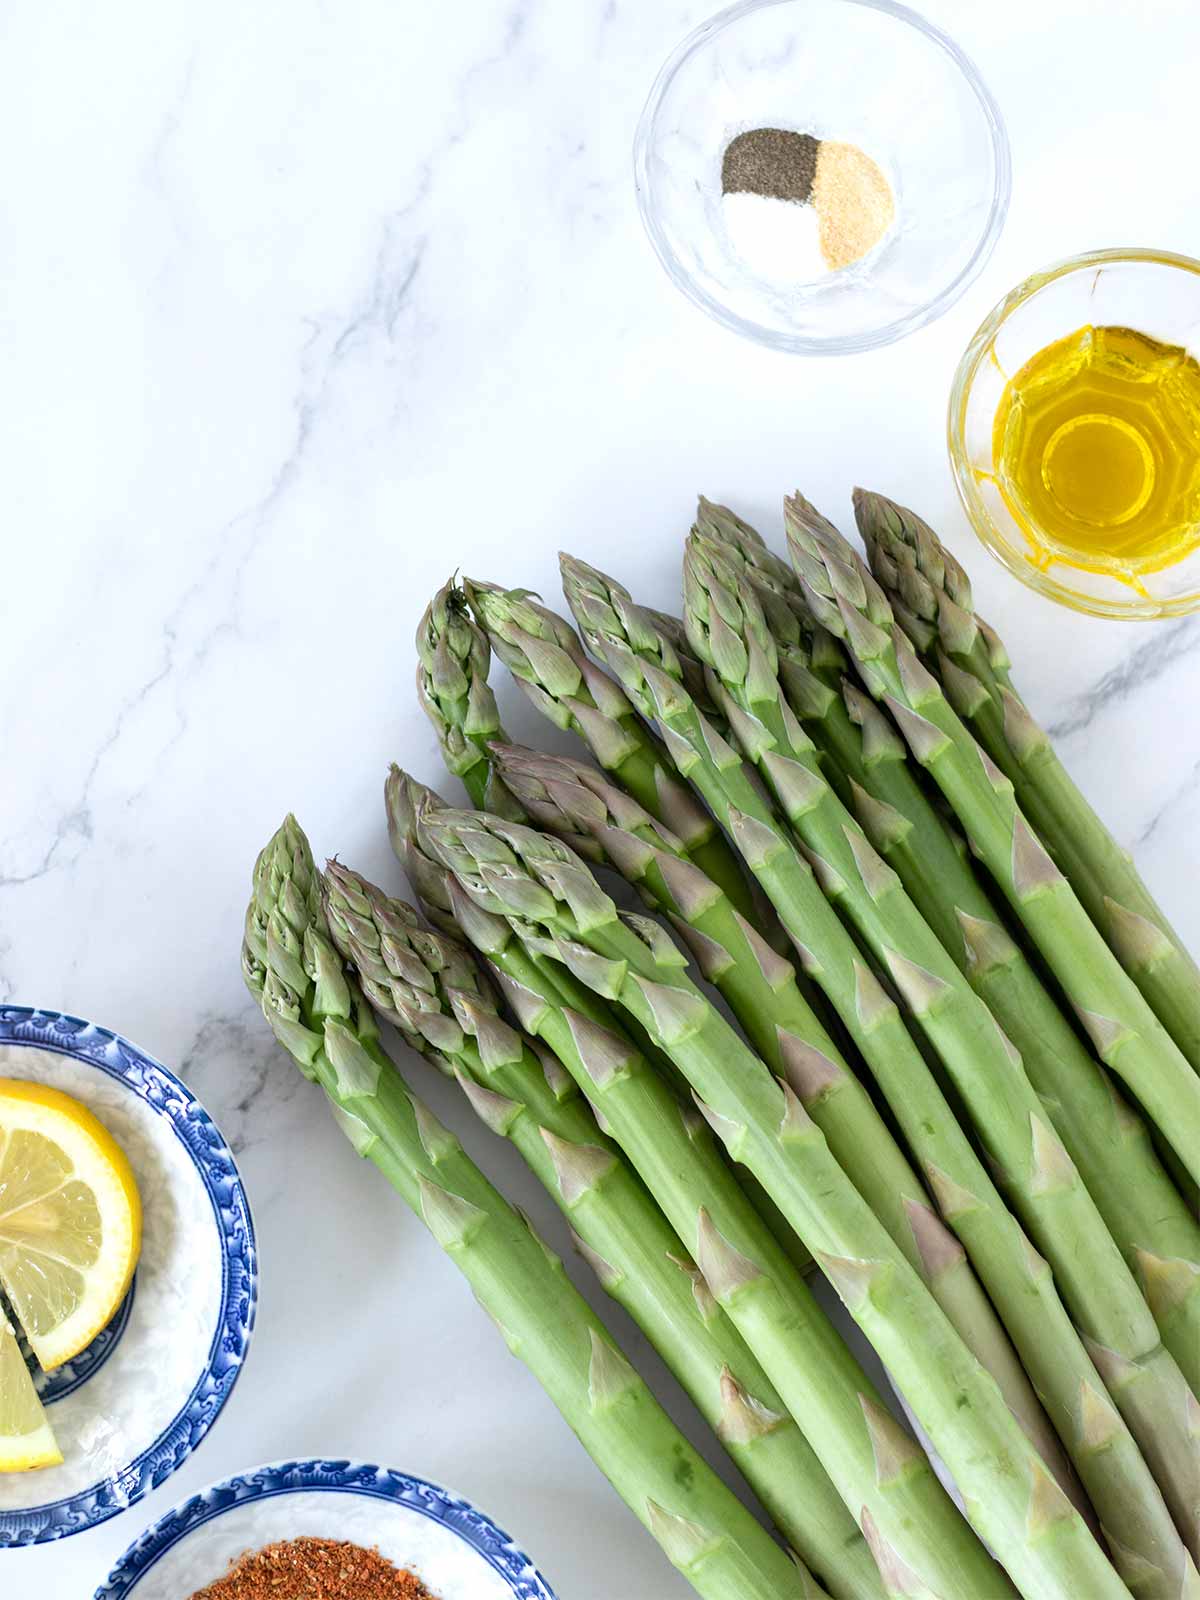 Simple ingredients for cooking oven-roasted asparagus recipe: fersh asparagus stalks, extra virgin olive oil, salt, spices, red pepper flakes and freshly squeezed lemon juice